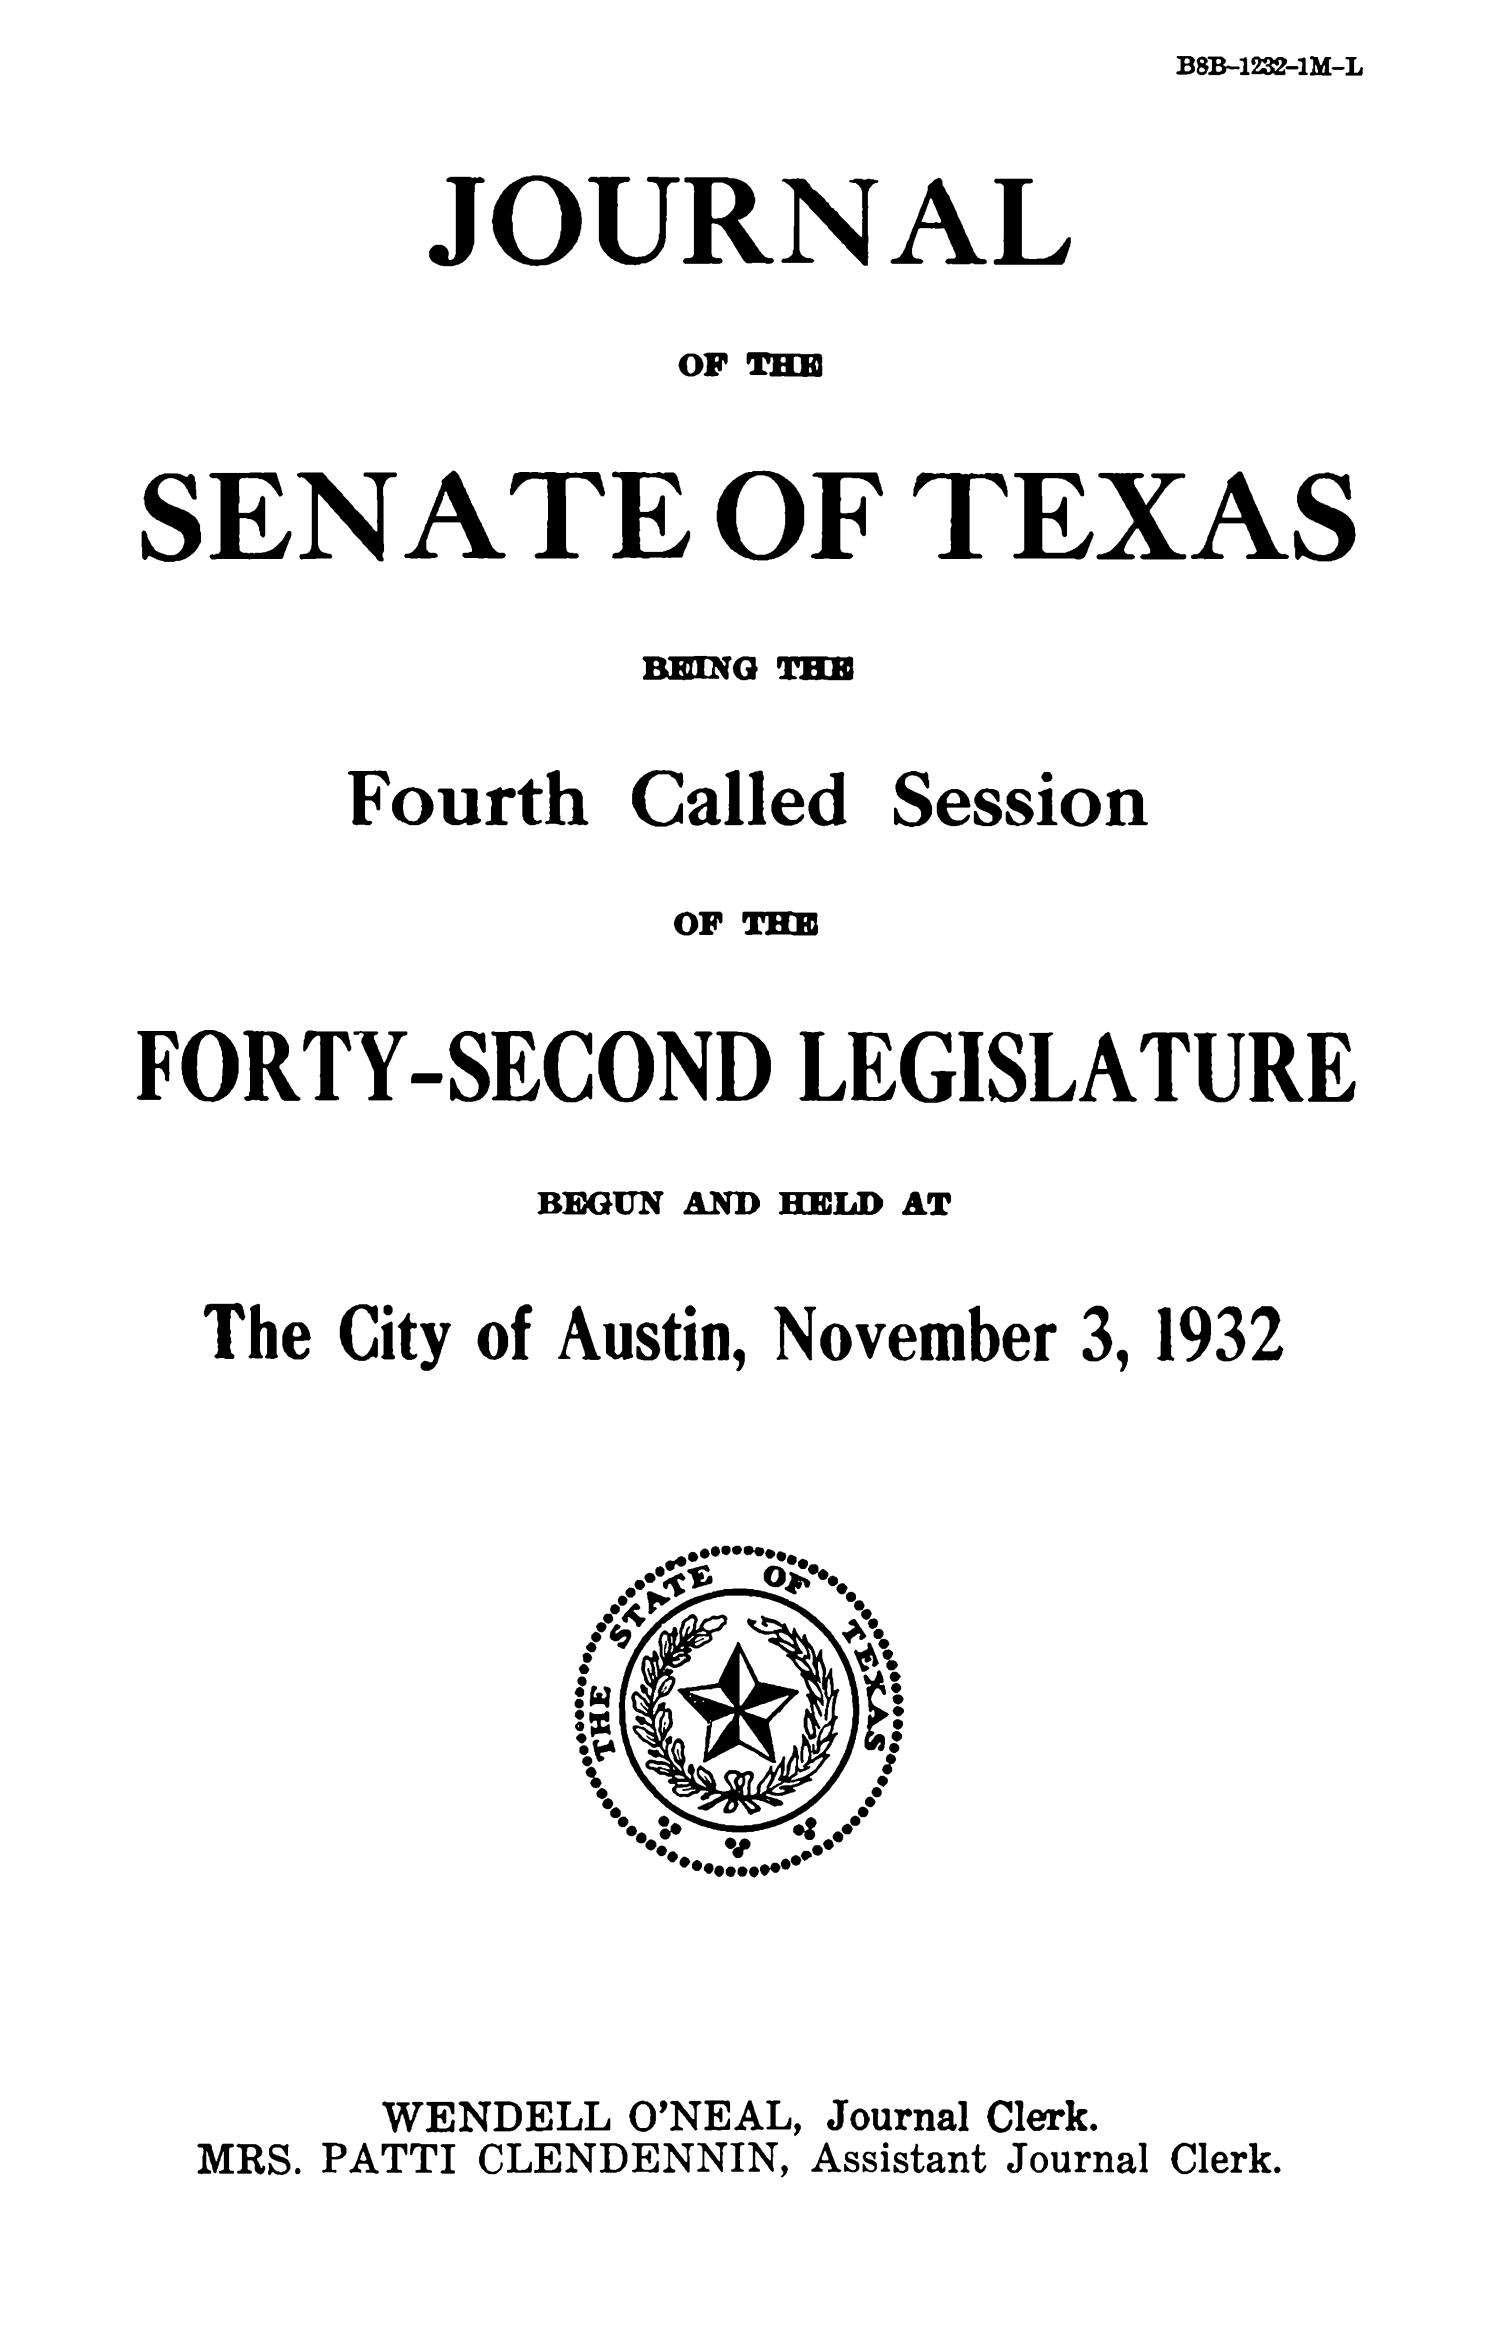 Journal of the Senate of Texas being the Fourth Called Session of the Forty-Second Legislature
                                                
                                                    Title Page
                                                